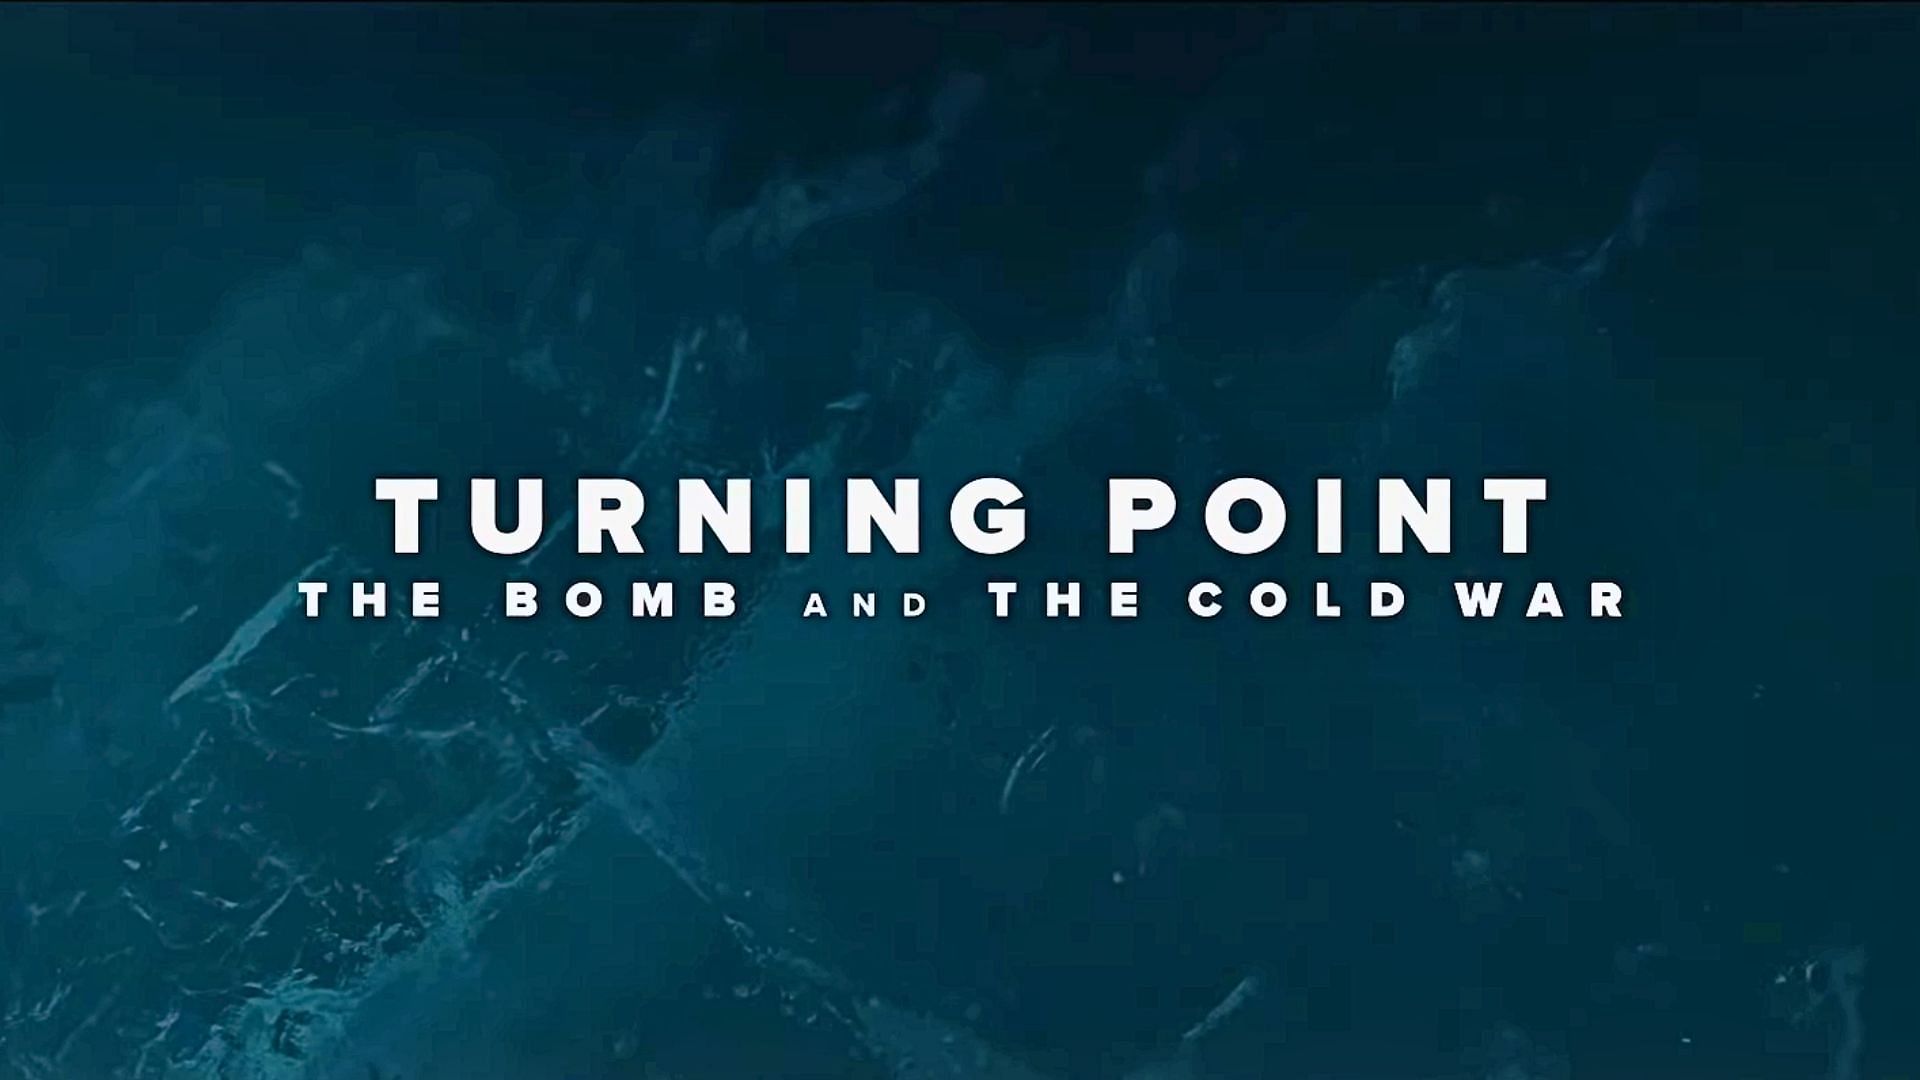 Brian Knappenberger directed Turning Point: The Bomb and the Cold War (Image via YouTube/Netflix, 2:28)